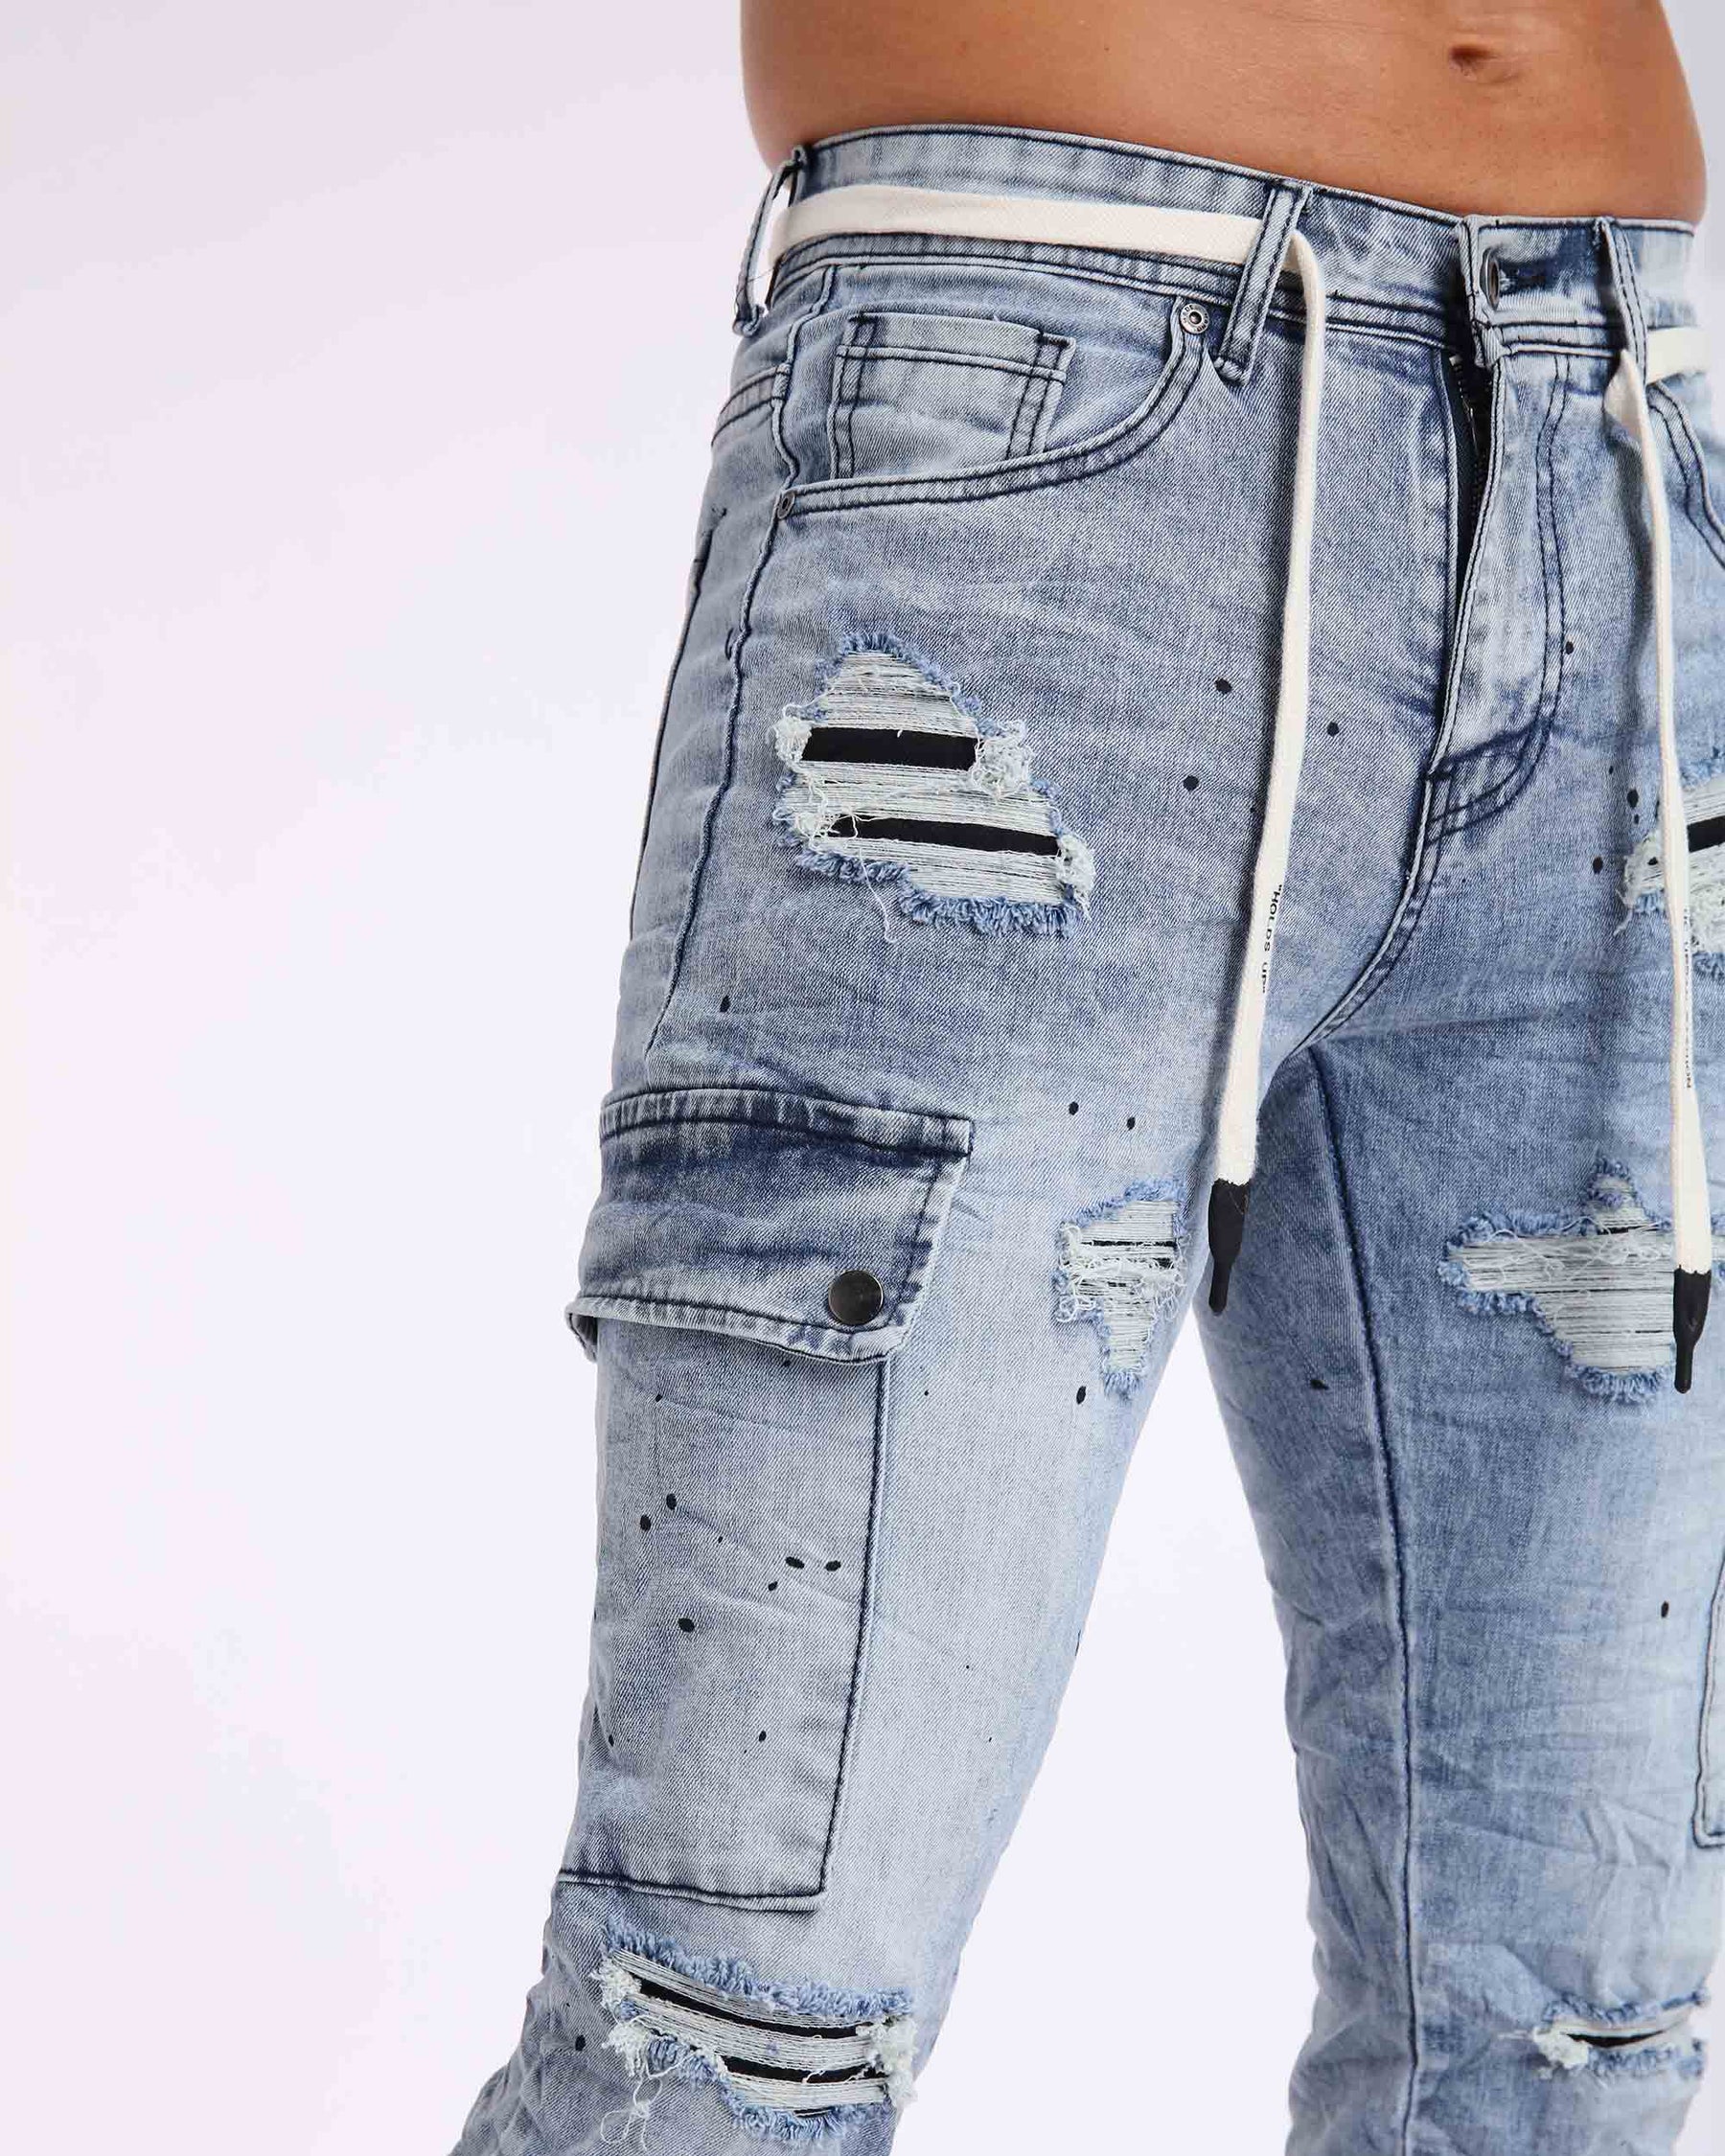 LOGEQI Irregular Spray Paint Blue Ripped Jeans